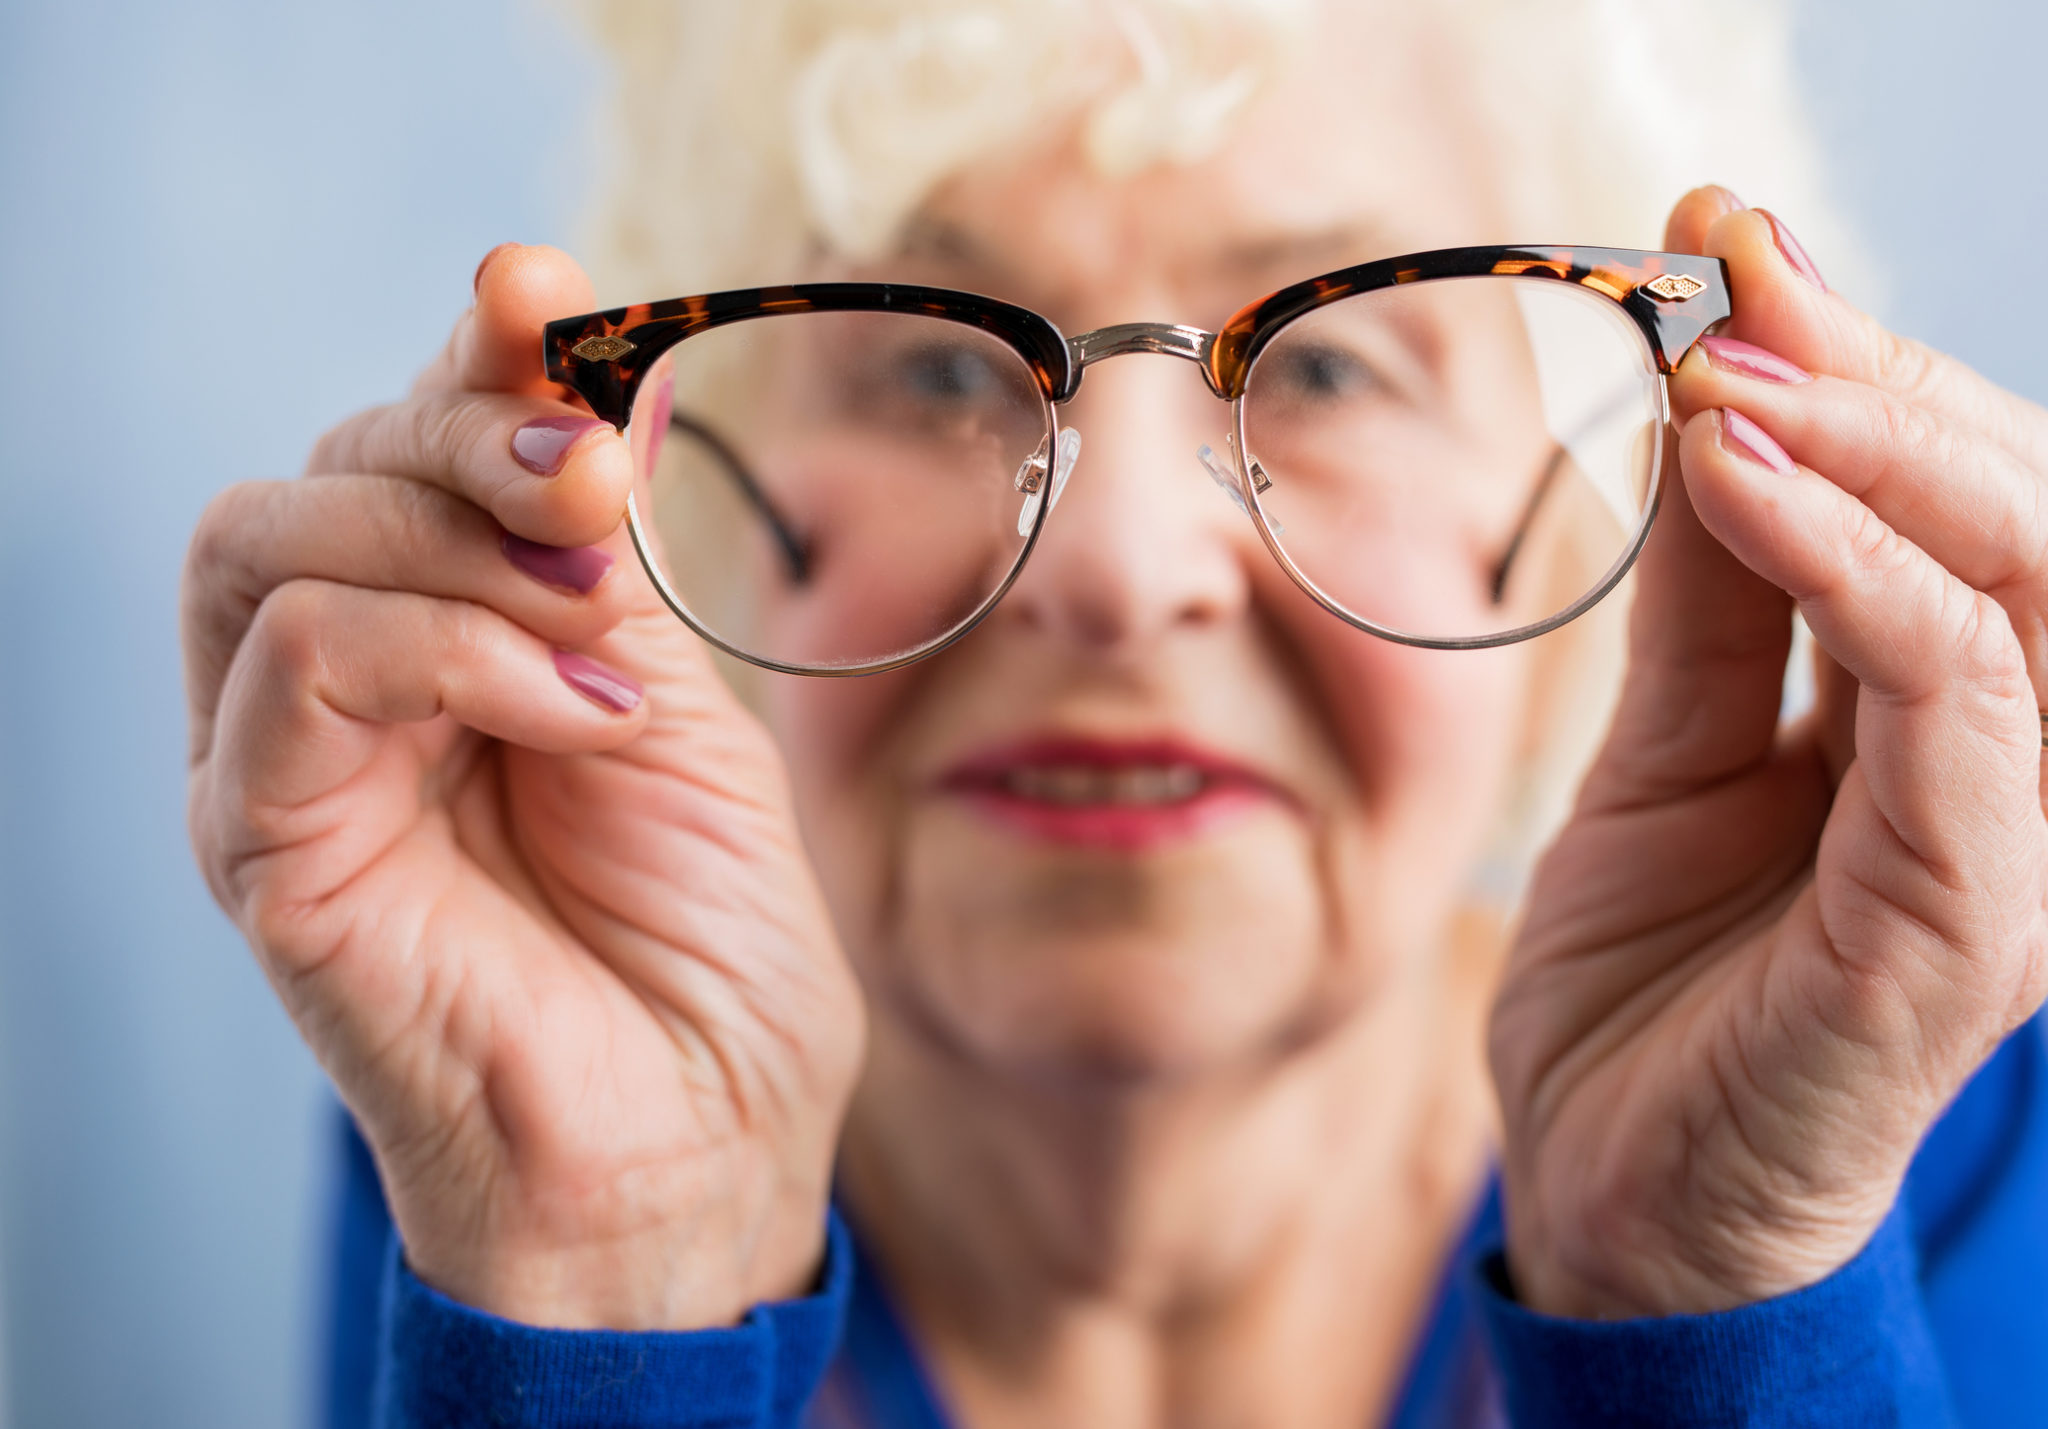 Grandma looking through her glasses to see better